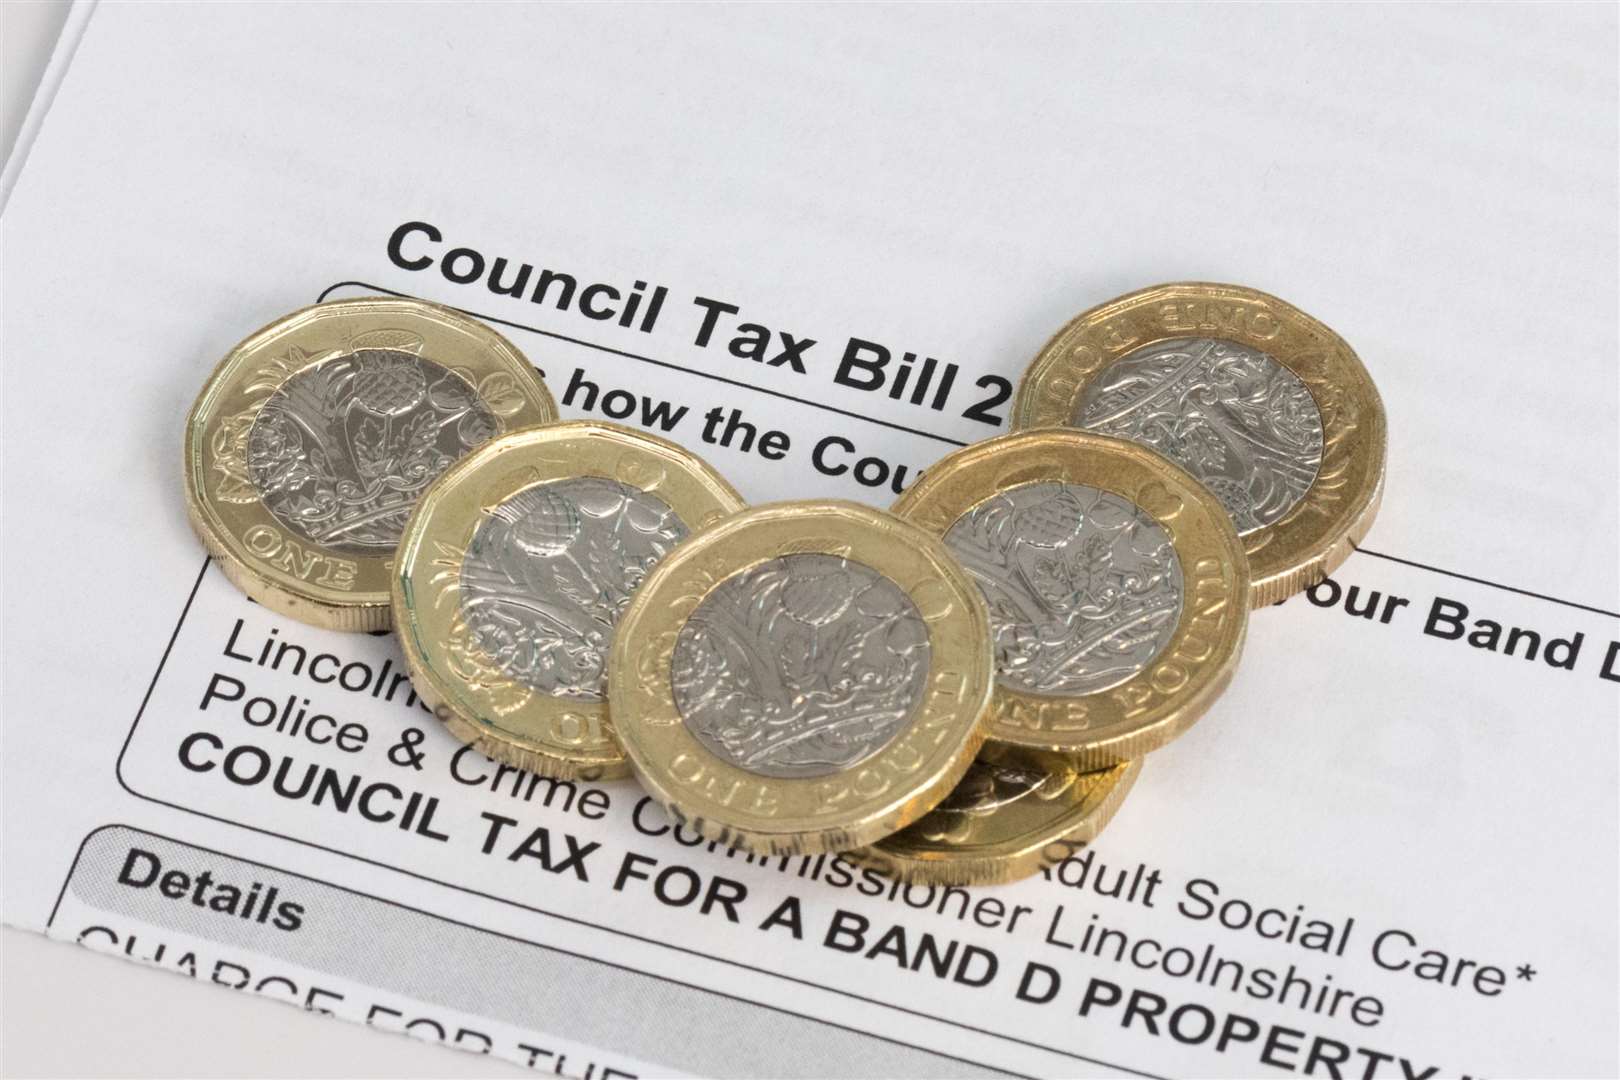 The Jones' will pay £2,136.83 this year for their council tax, an overall rise of £63.47 per year